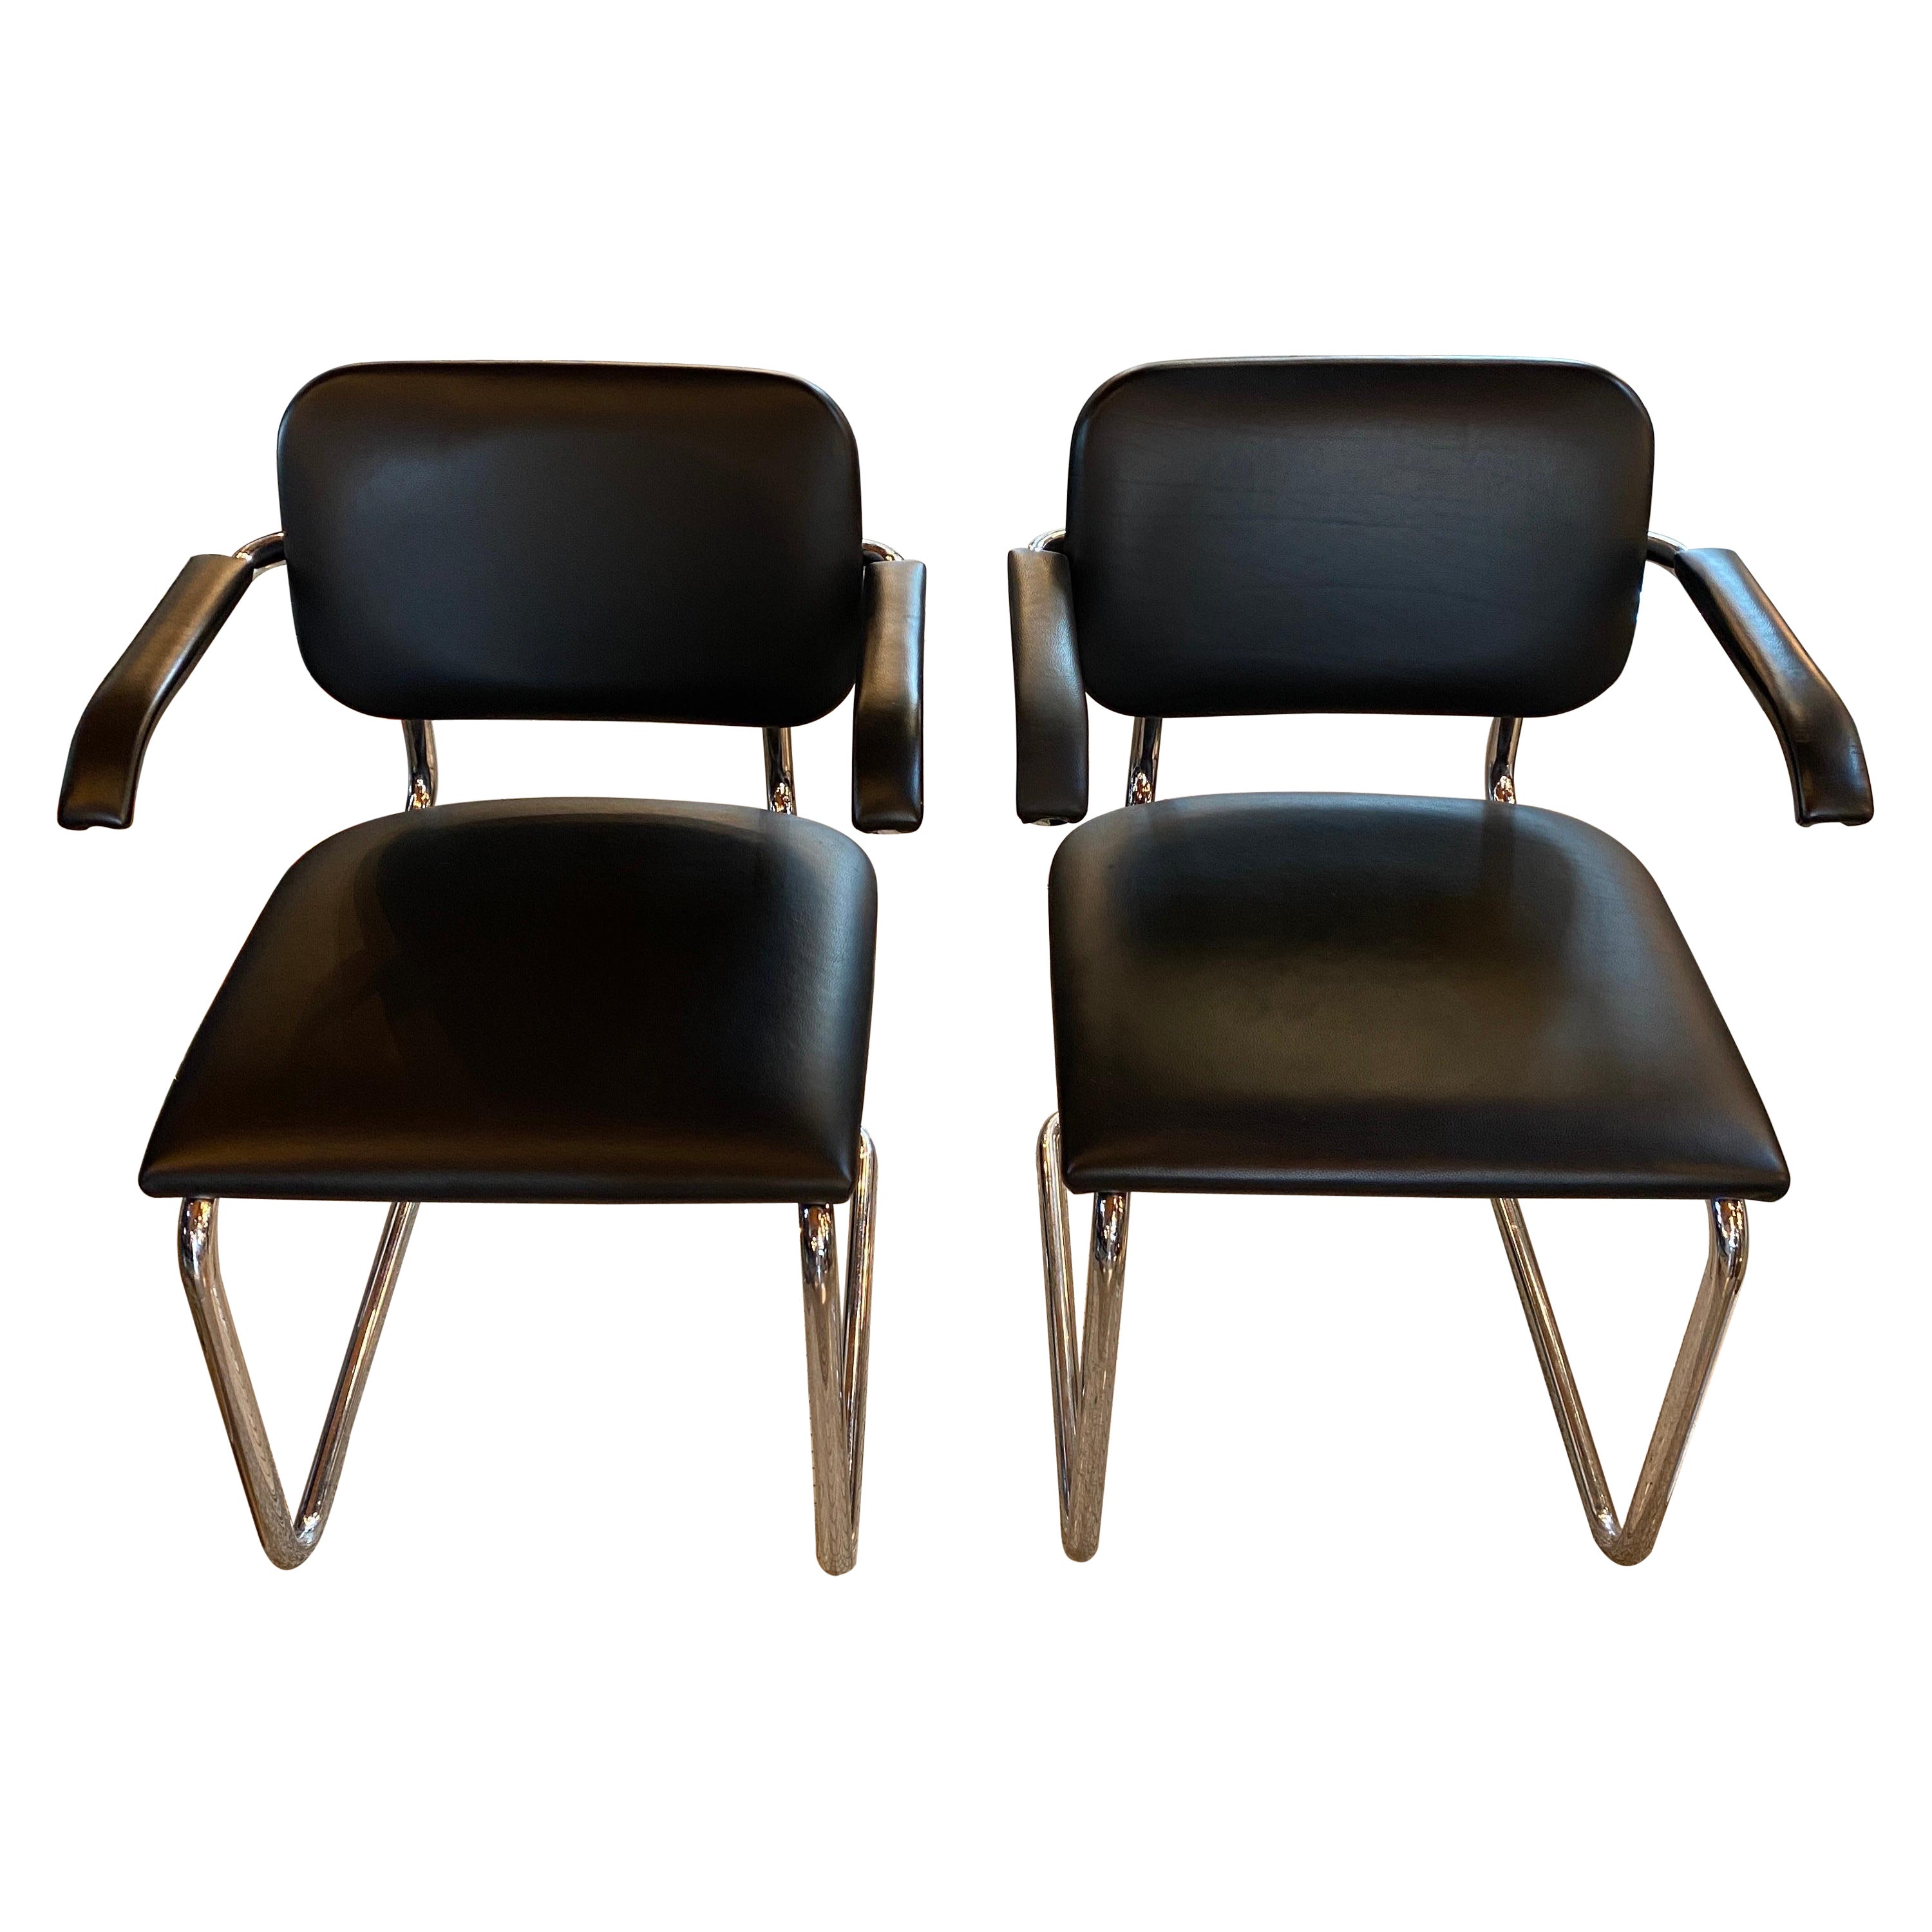 Pair of Cesca Arm Chairs by Marcel Breuer 1928 for Knoll